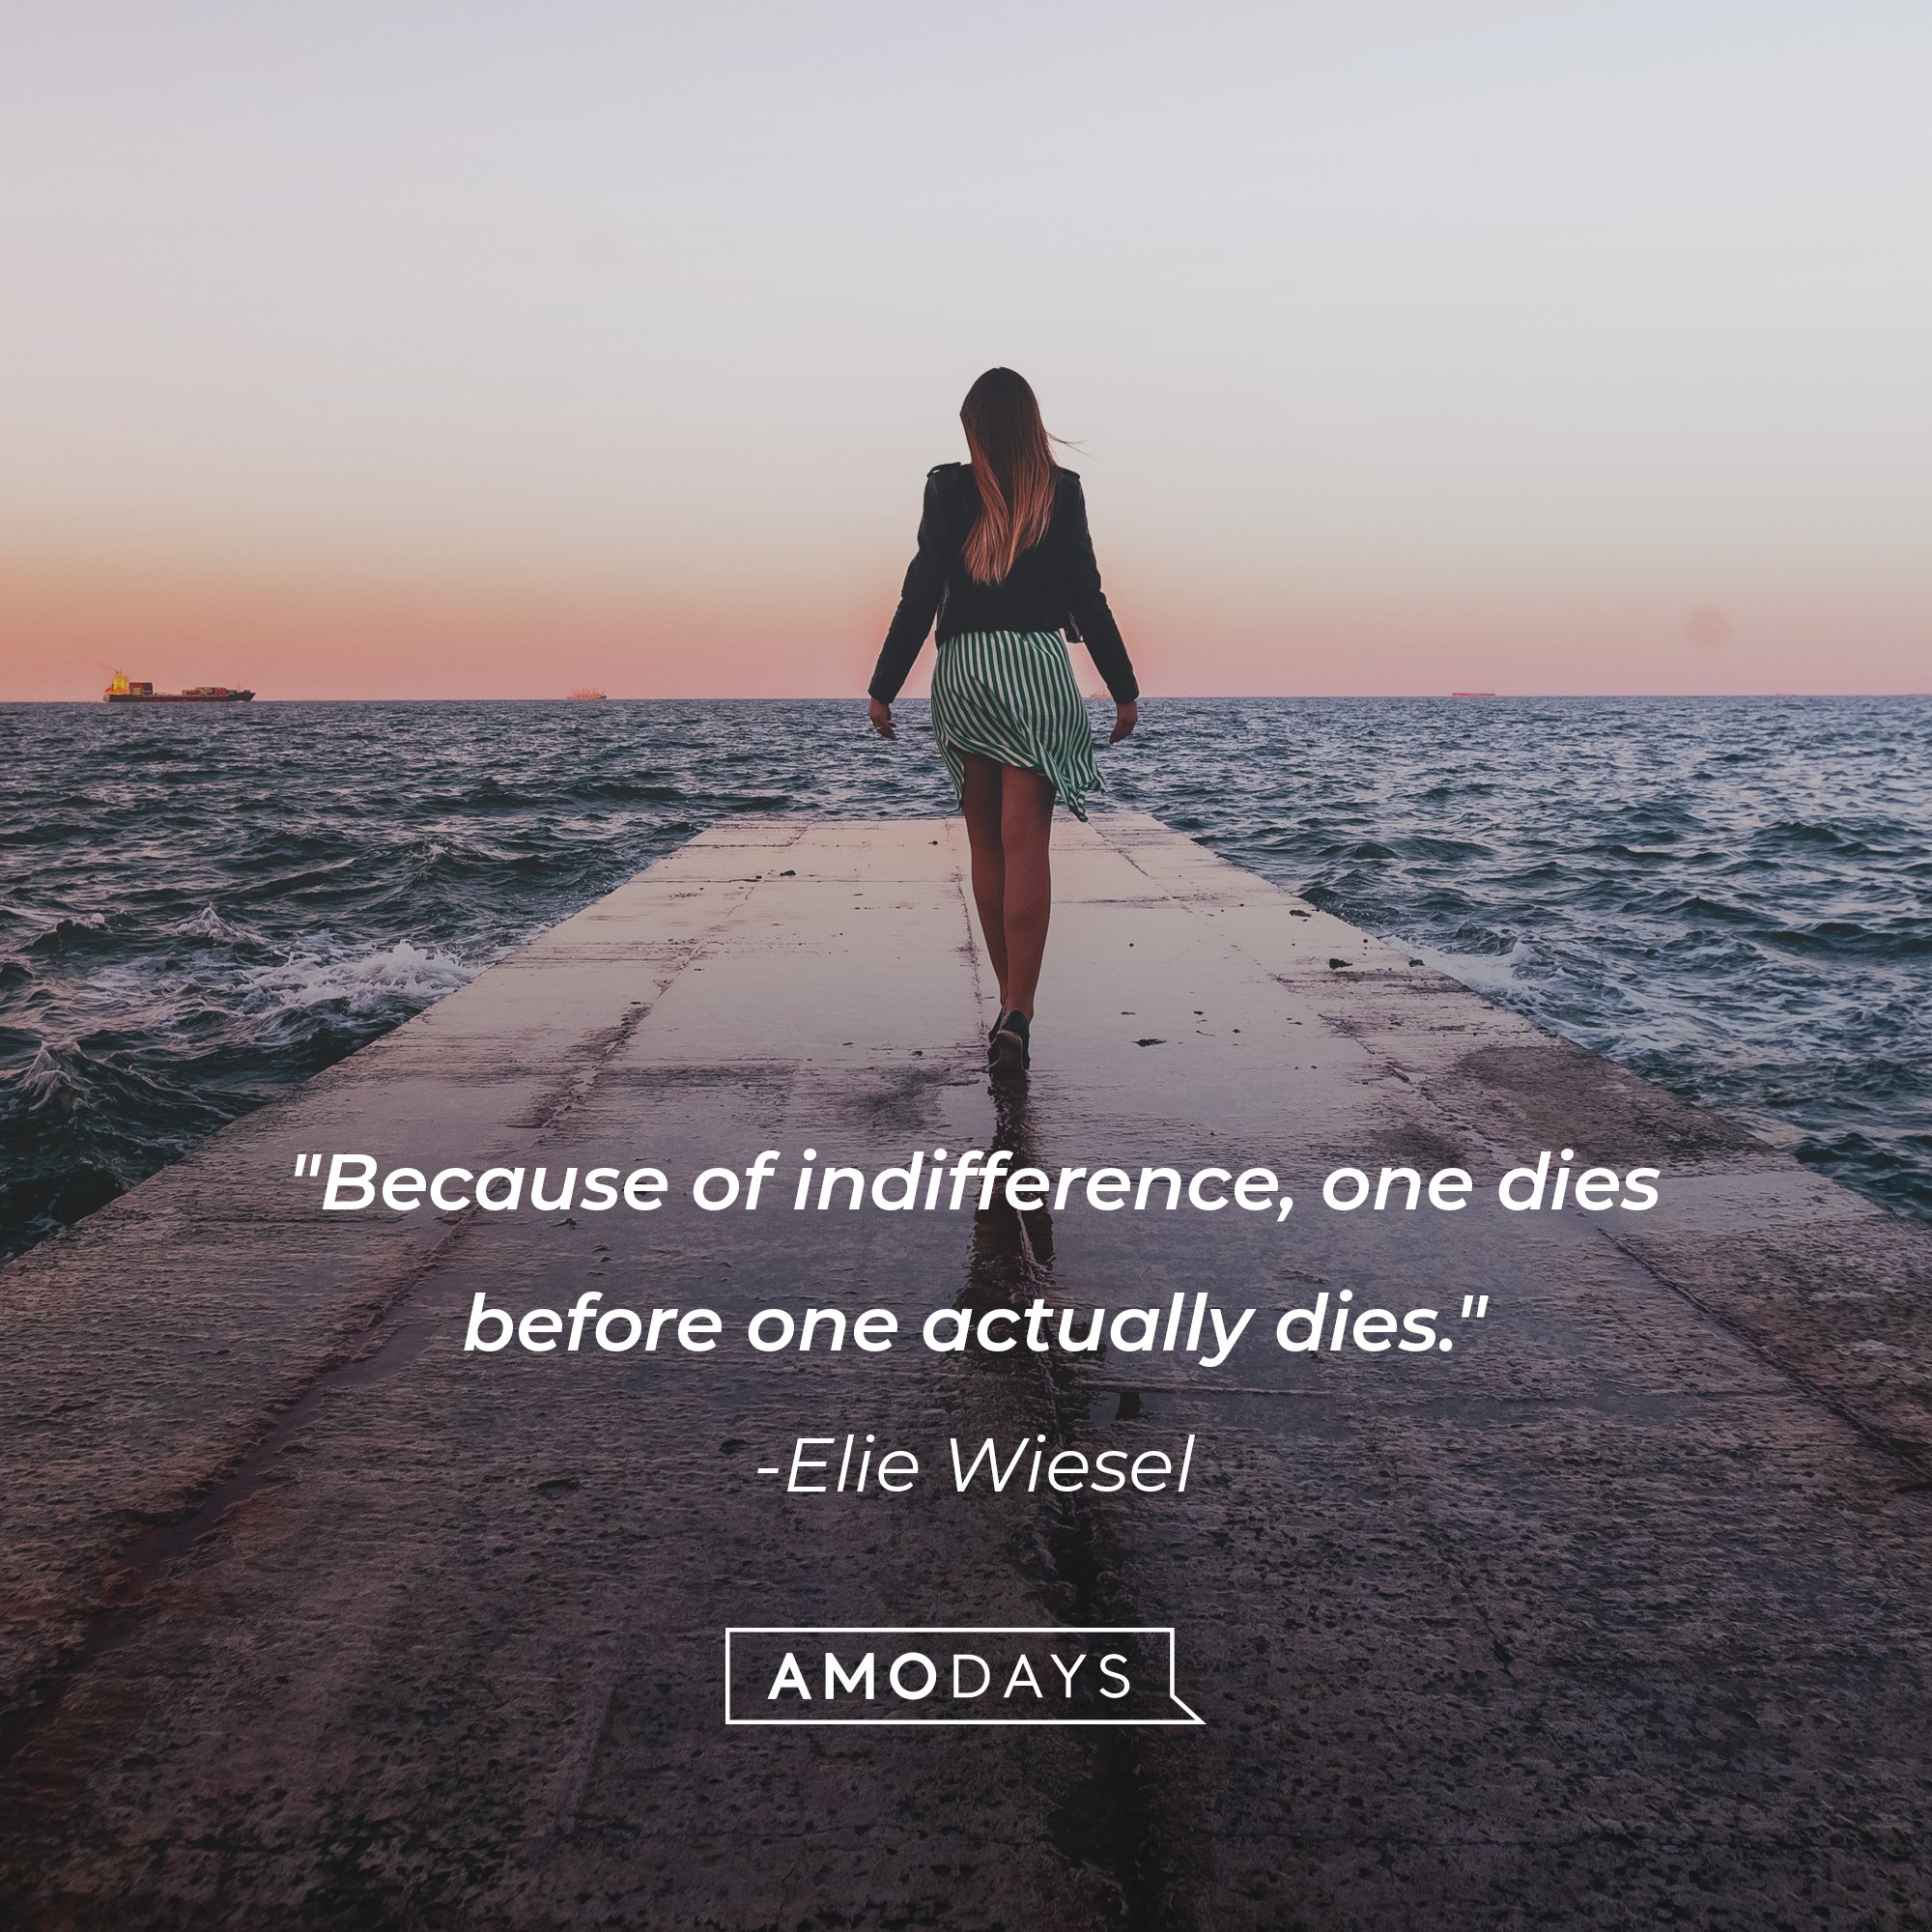 Elie Wiesel's quote: "Because of indifference, one dies before one actually dies." | Image: AmoDays